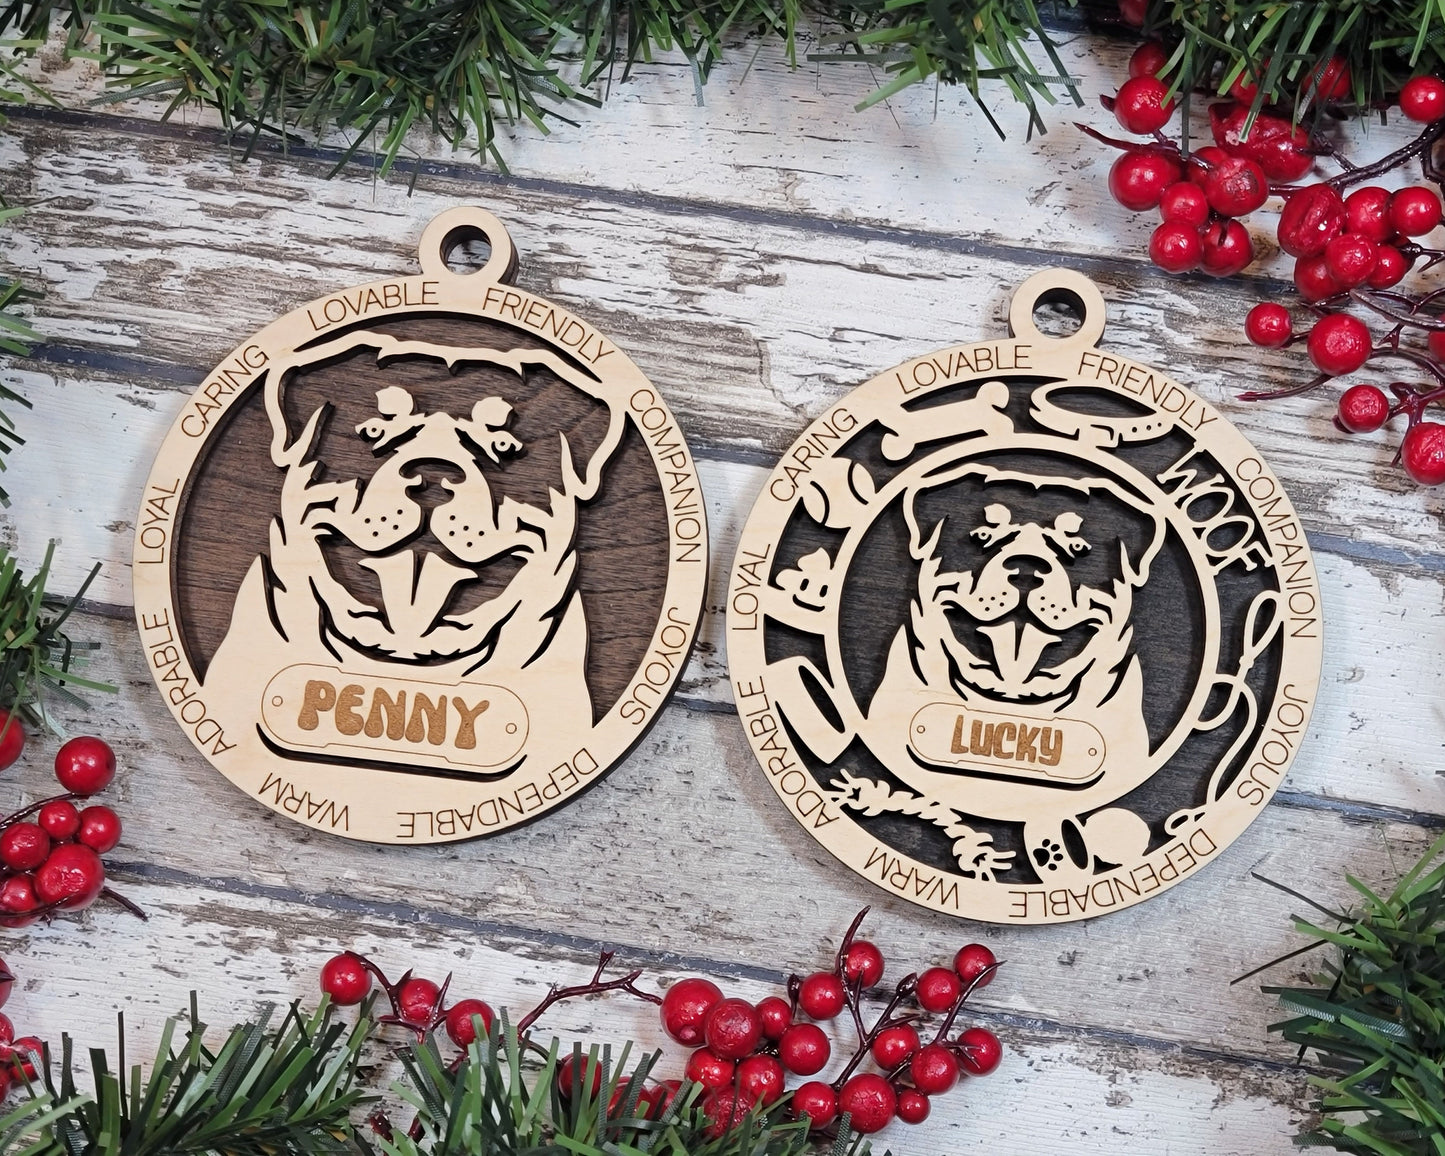 Rottweiler - Adorable Dog Ornaments - 2 Ornaments included - SVG, PDF, AI File Download - Sized for Glowforge